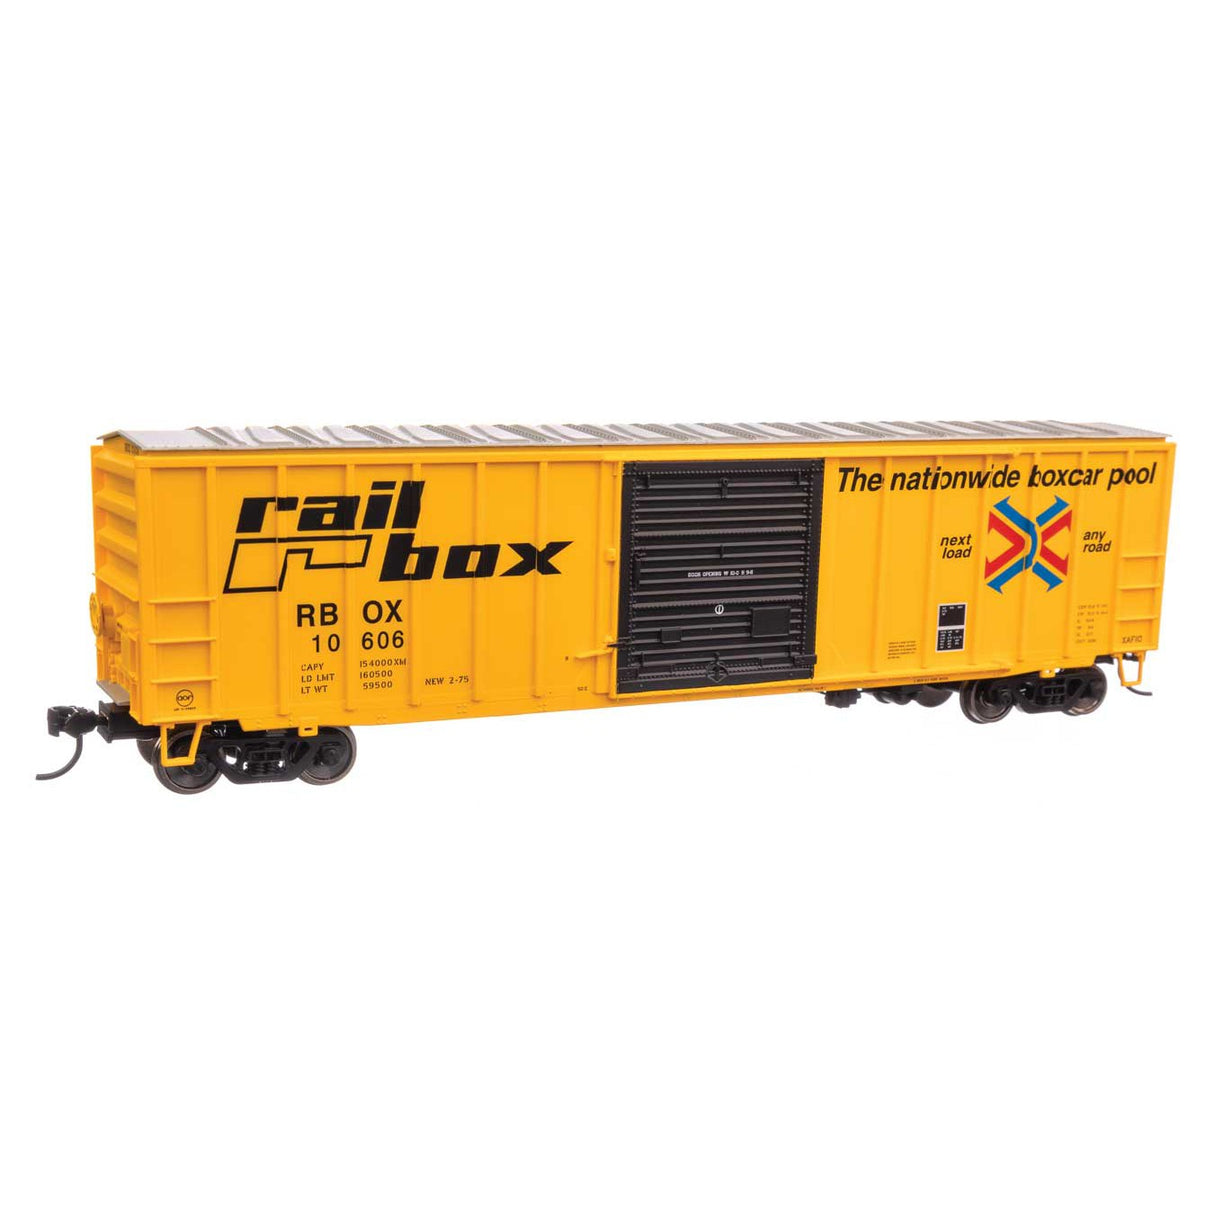 Walthers Mainline HO Scale Railbox RBOX #10606 50' ACF Exterior Post Boxcar